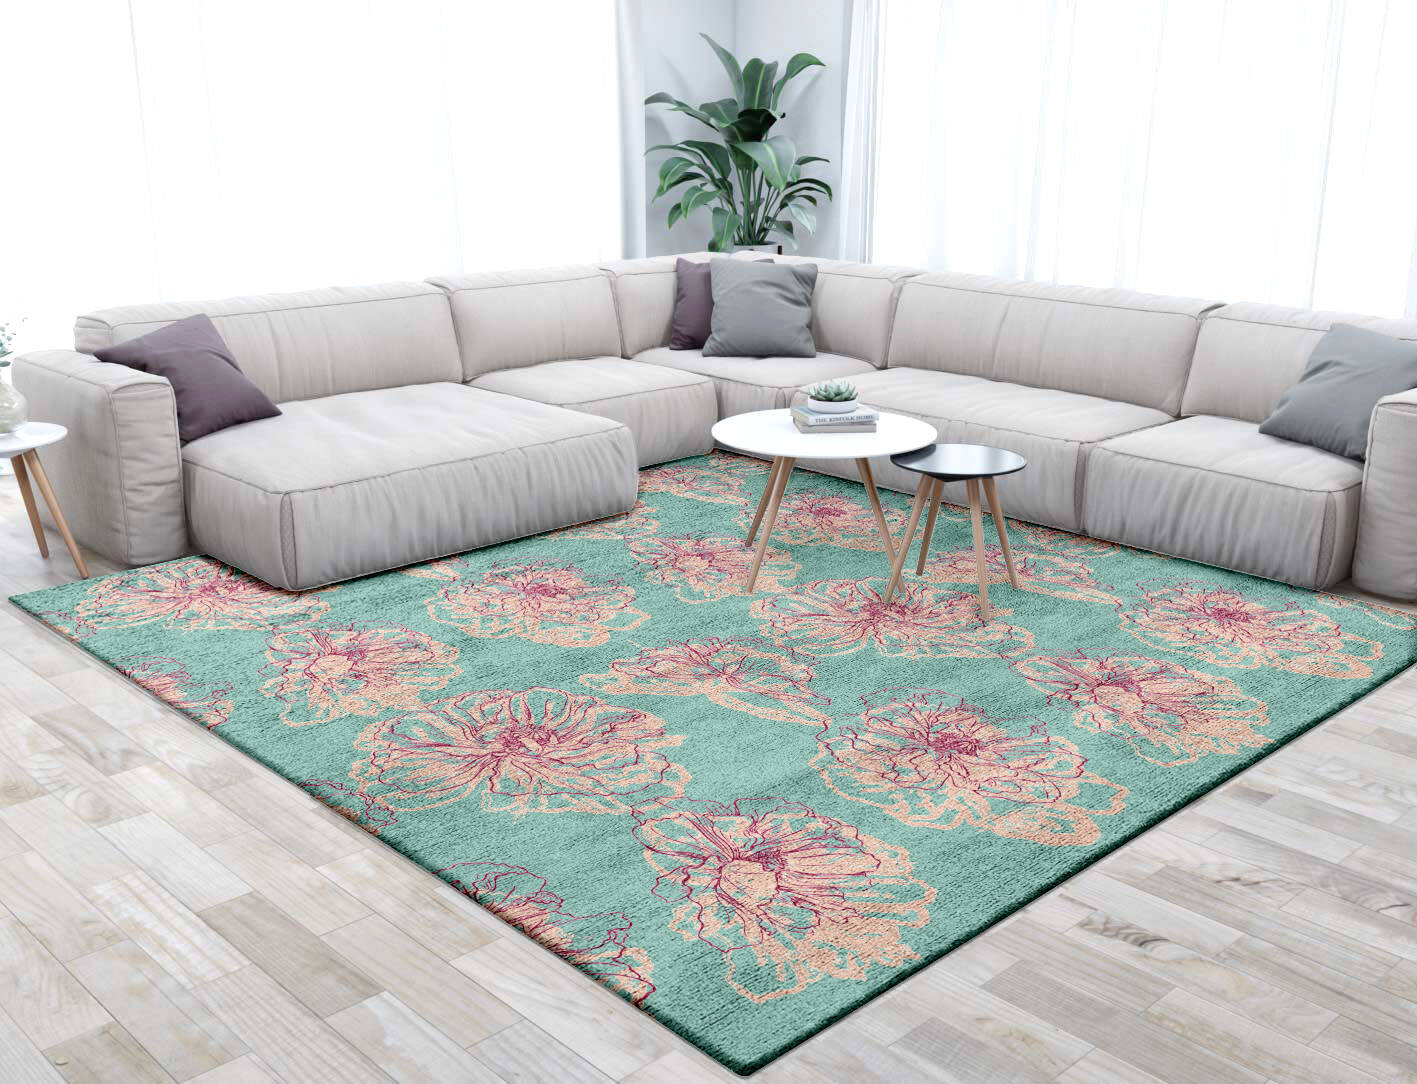 Cotton Candy Floral Square Hand Tufted Bamboo Silk Custom Rug by Rug Artisan